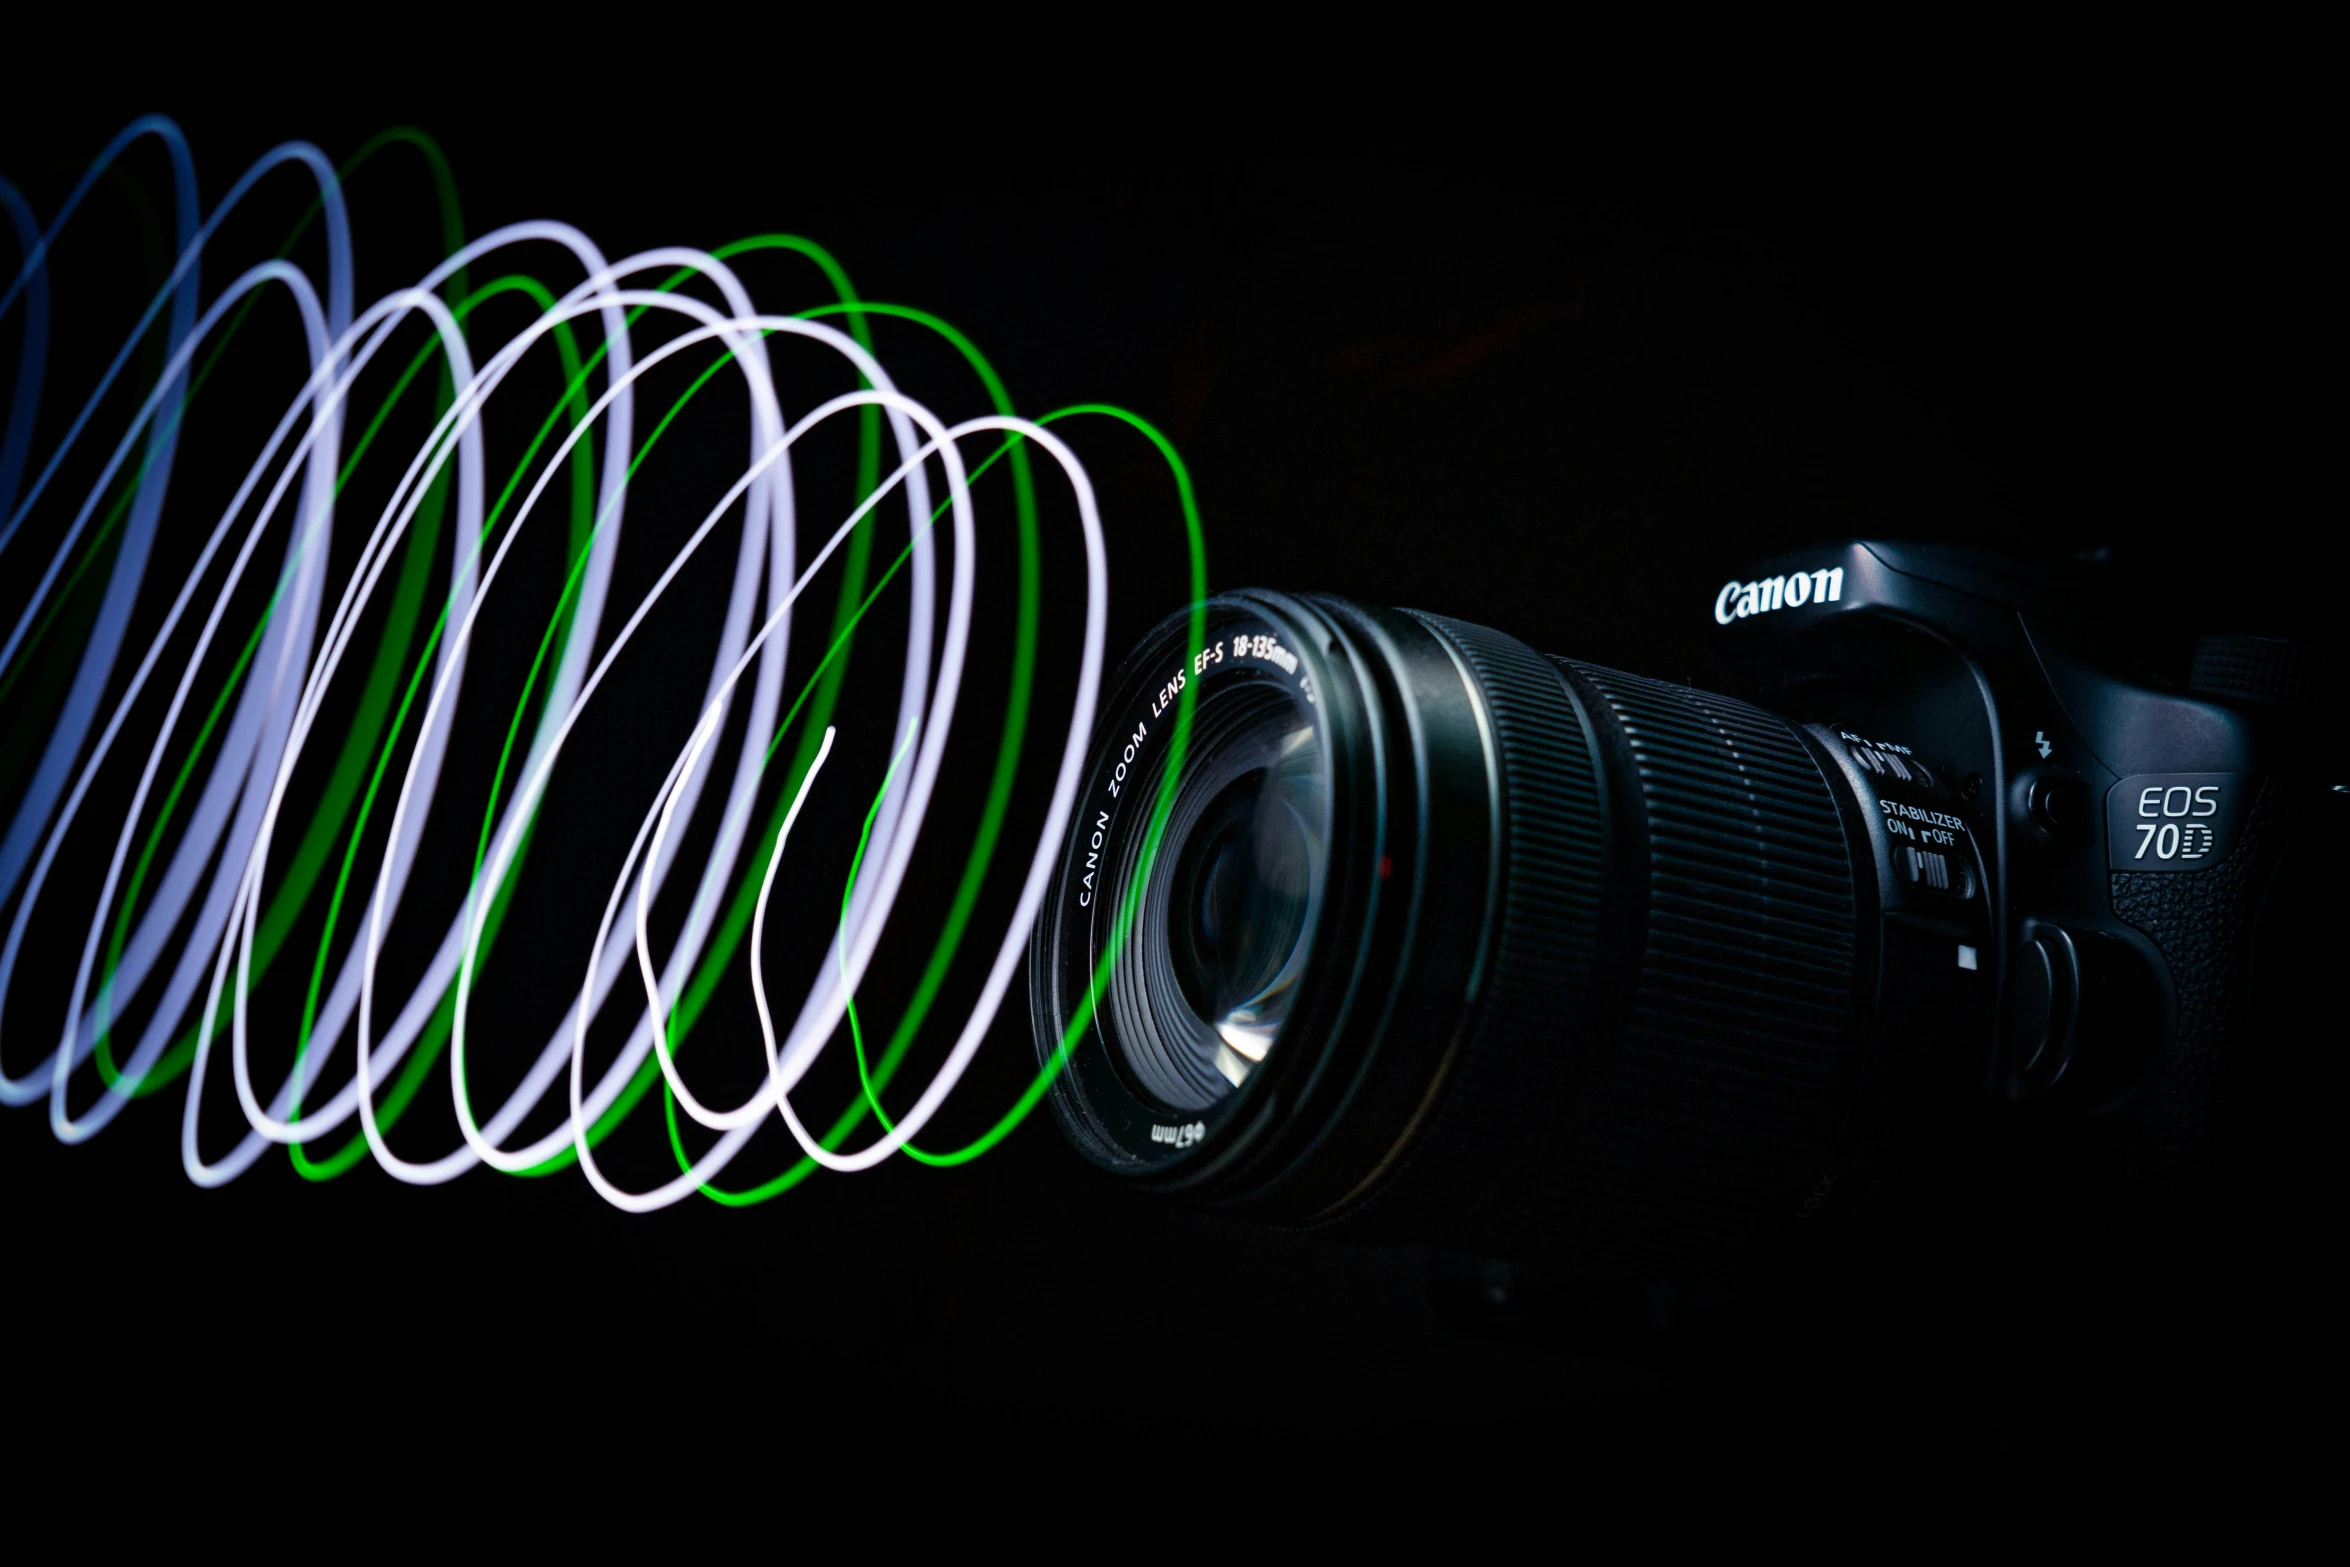 a camera with green and white lens sitting in front of some spiraly neon lights